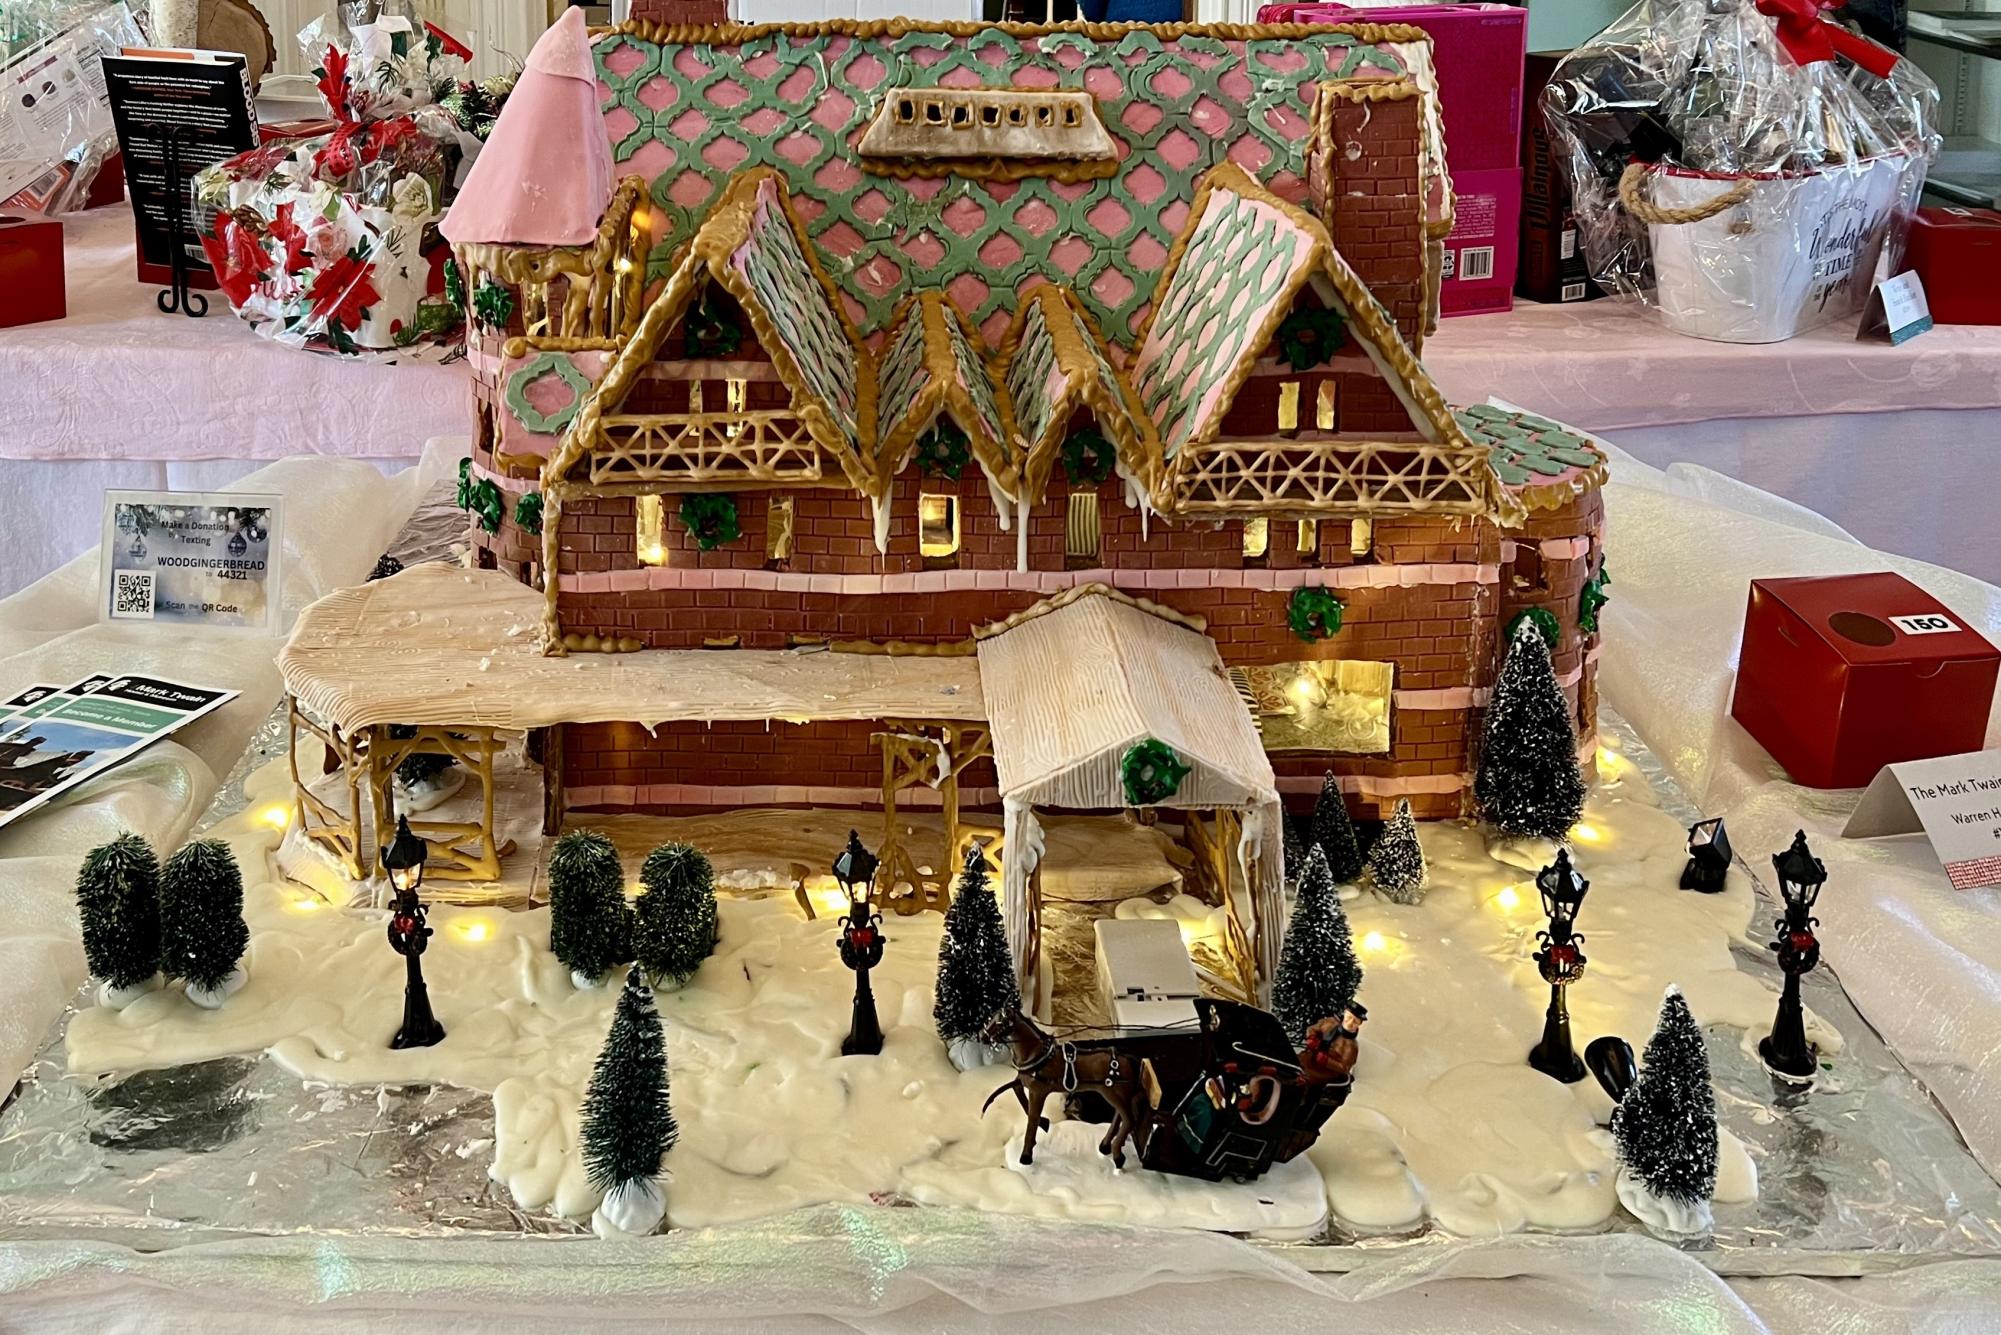 Award winning gingerbread house created by South Windsor resident sits at the entrance of the display.